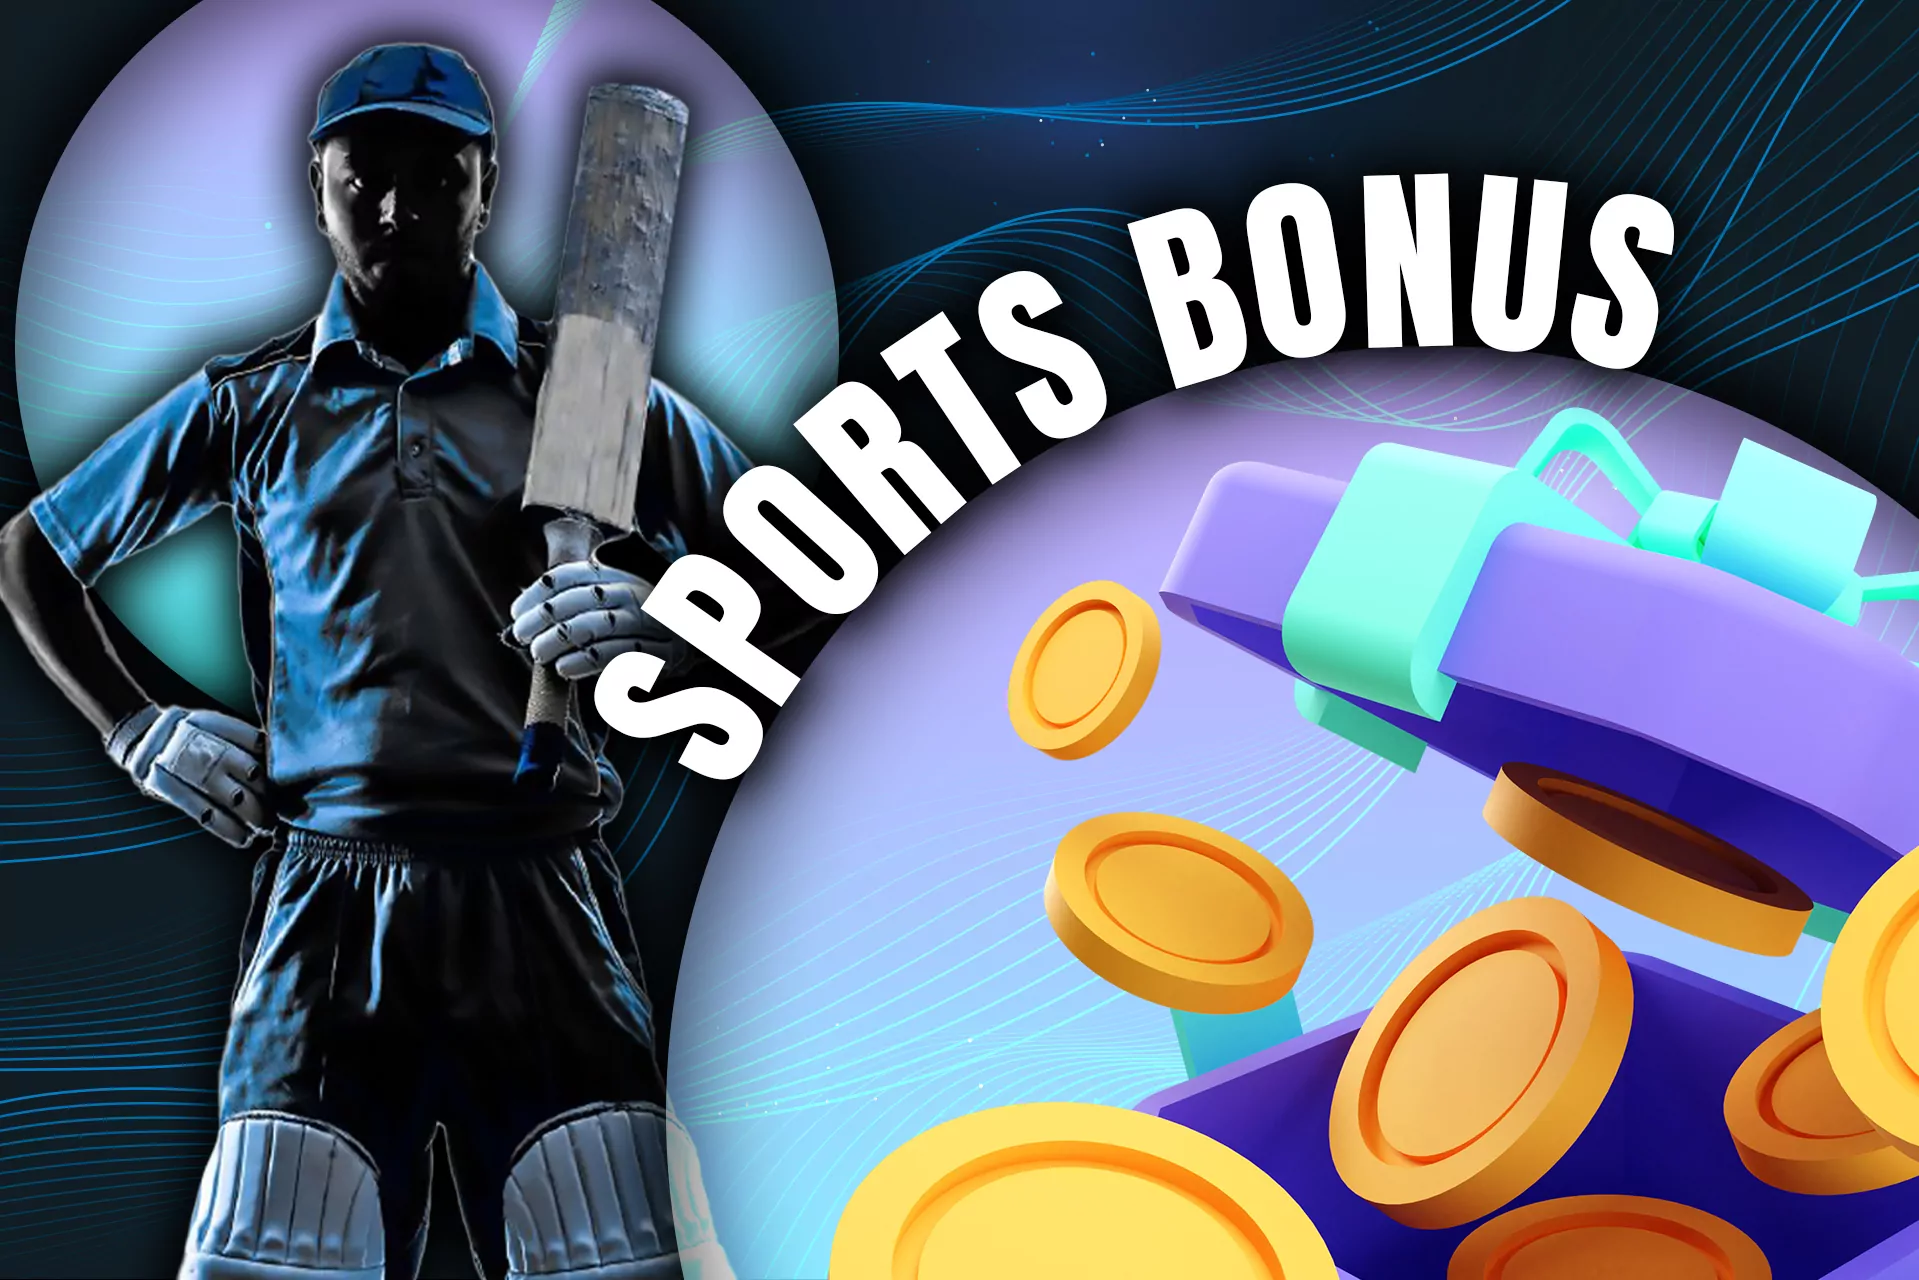 If you successfully wagering sports bonus, you can also successfully withdraw it.